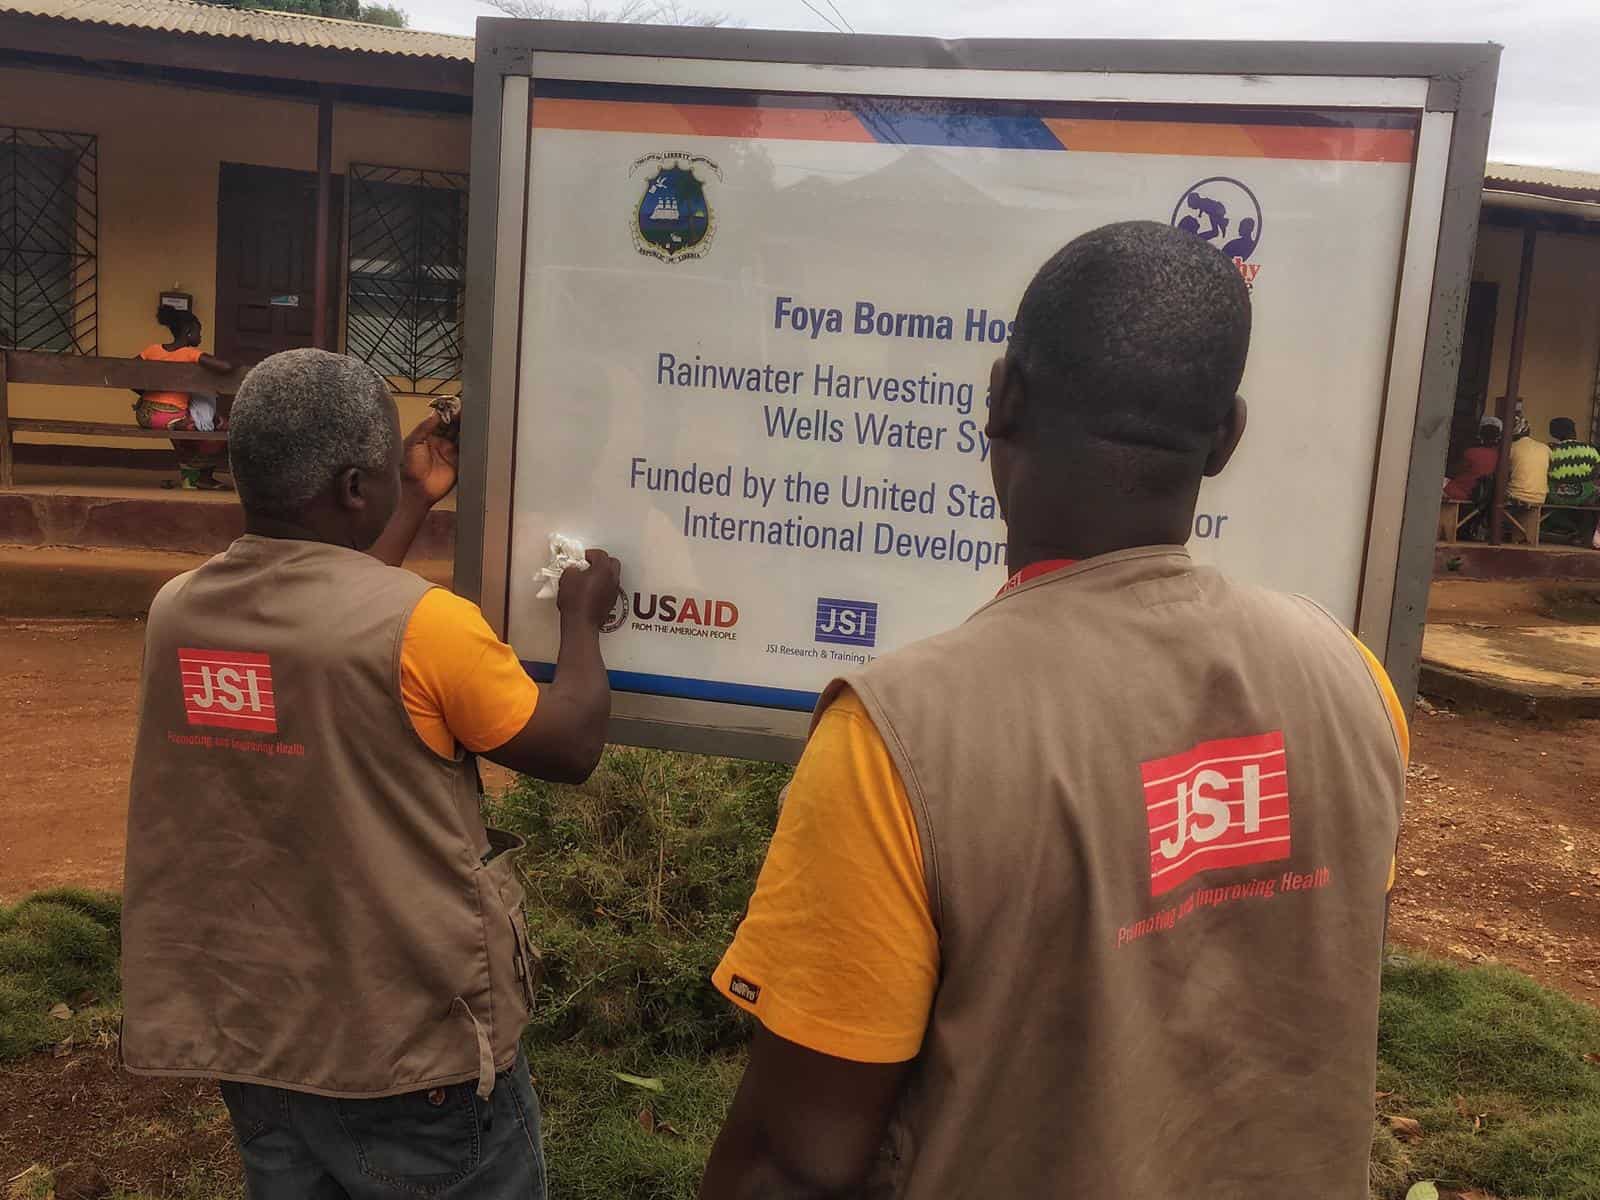 USAID dedicated a rainwater harvester and wells constructed by JSI to supply water to two hospitals in Lofa County, Liberia.